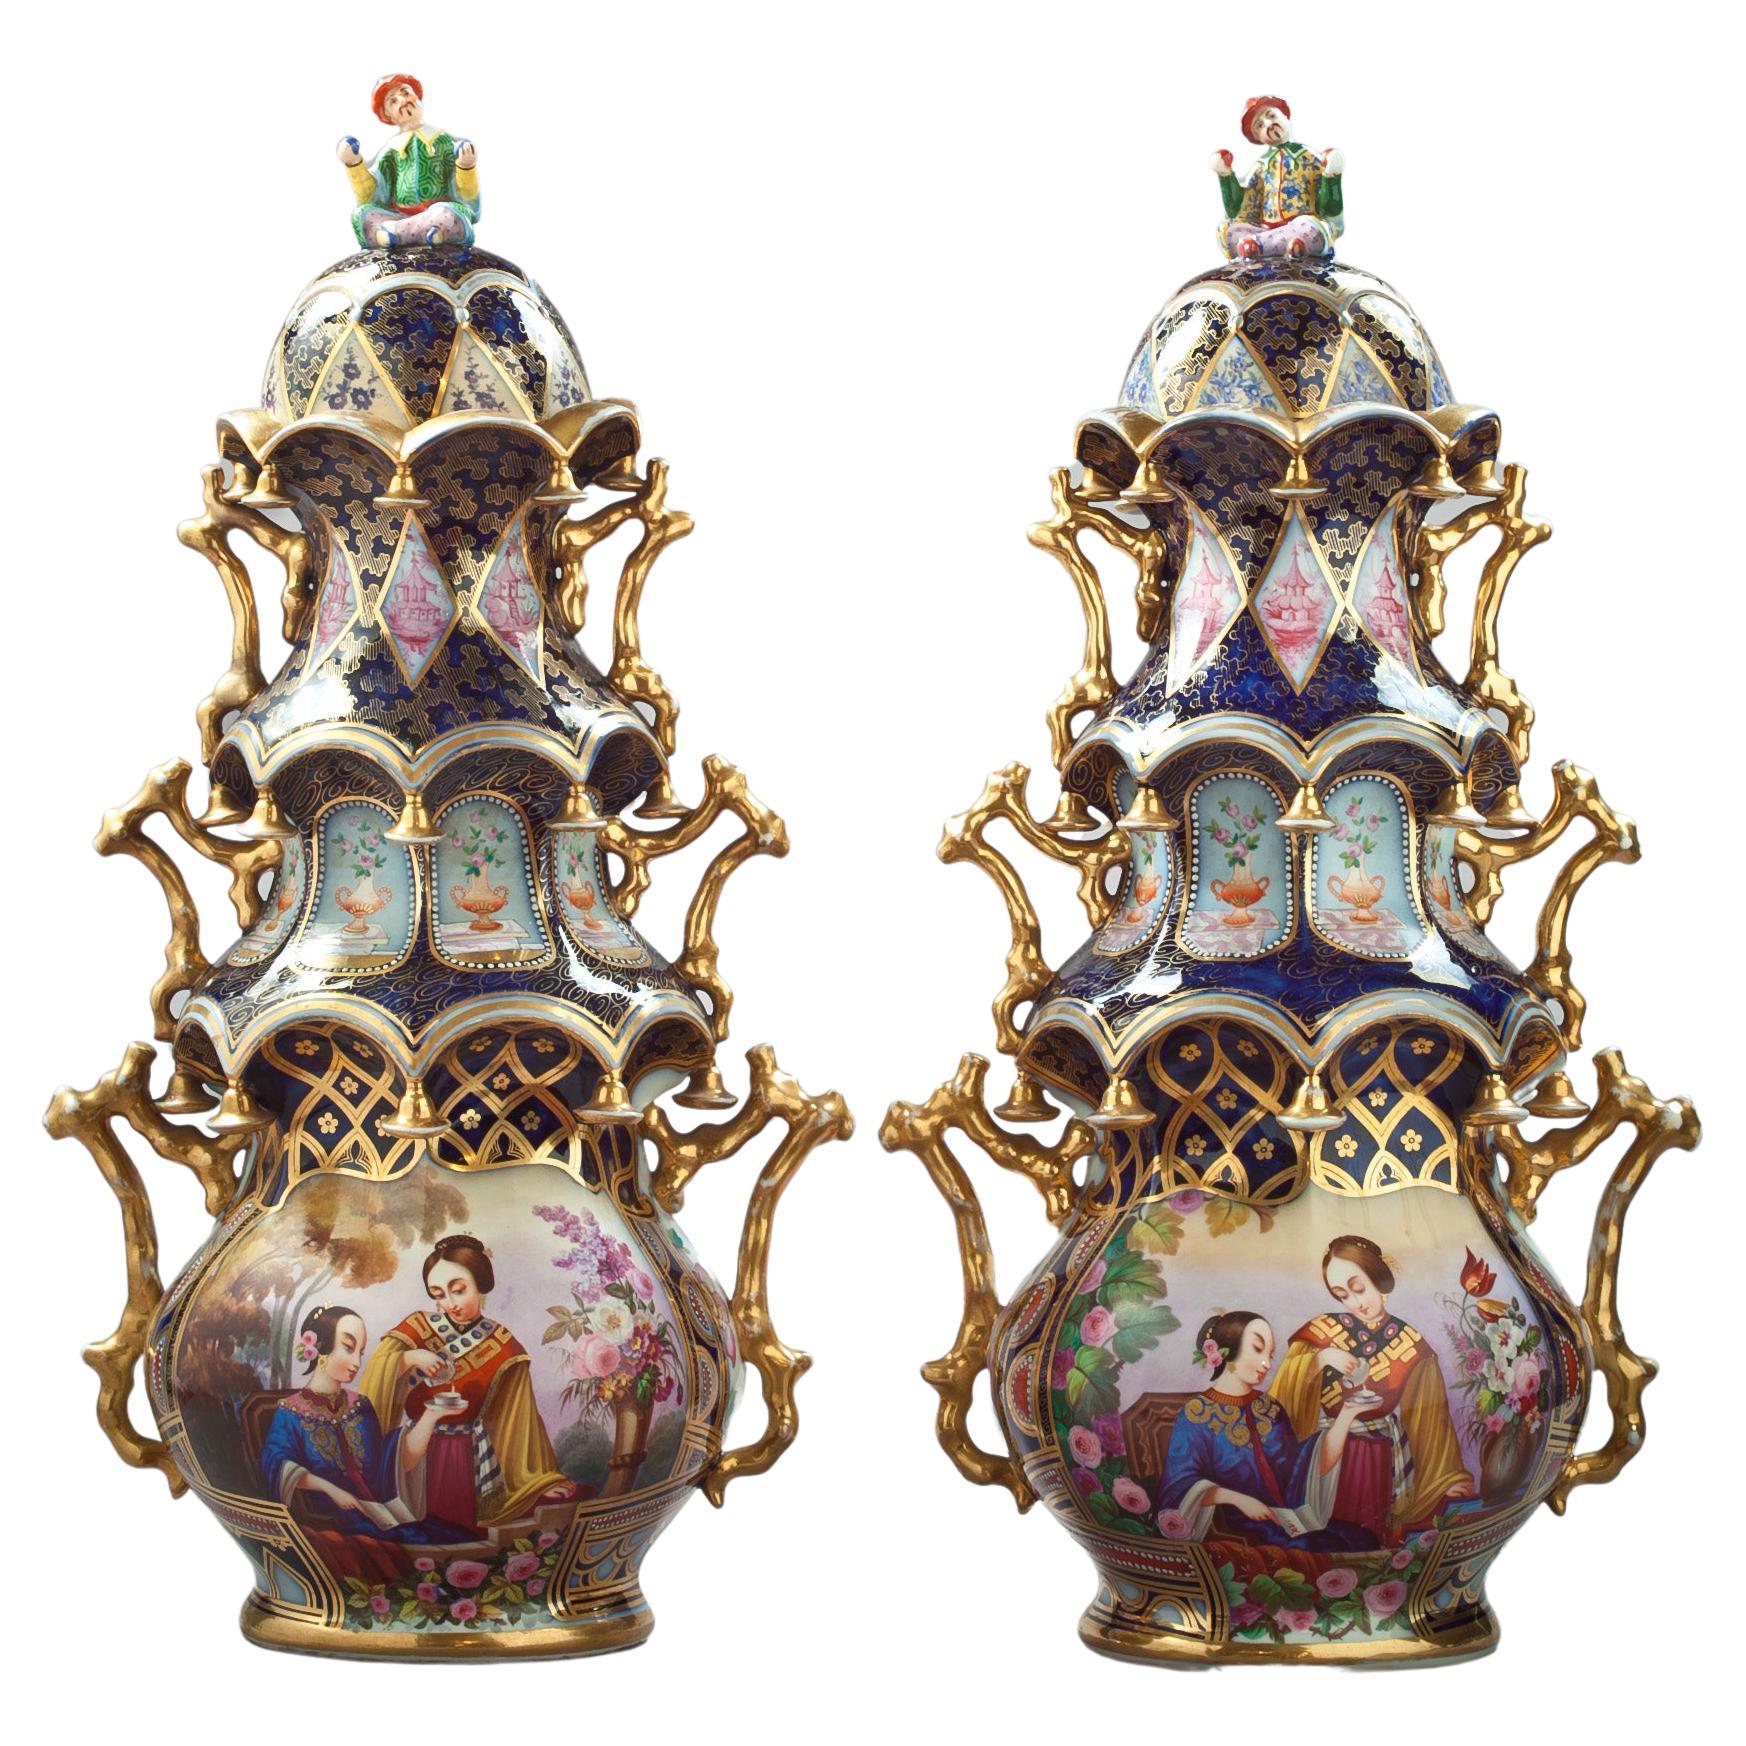 Pair of Rare French Porcelain Covered "Pagoda" Urns, Bayeux, circa 1845 For Sale